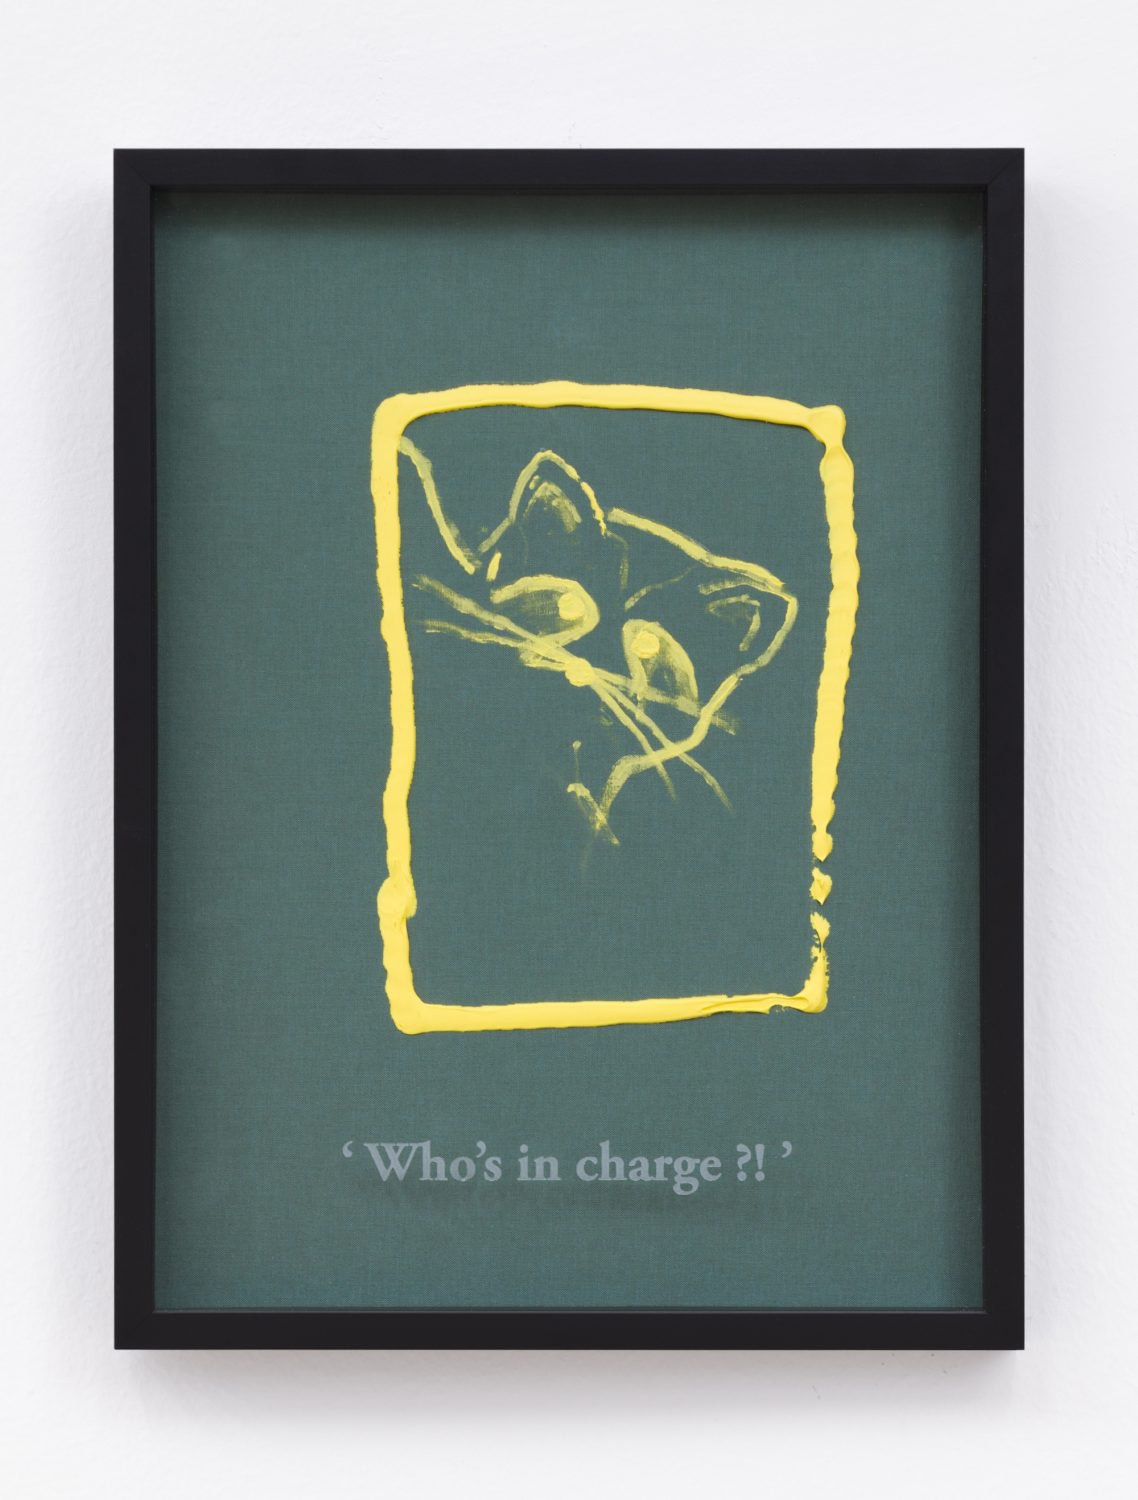 Philipp Timischl&quot;Who&#x27;s in charge?!&quot; (Green/Brilliant Yellow Light), 2017Acrylic on linen and glass-engraved object frame40.1 x 32.1 cm, unique